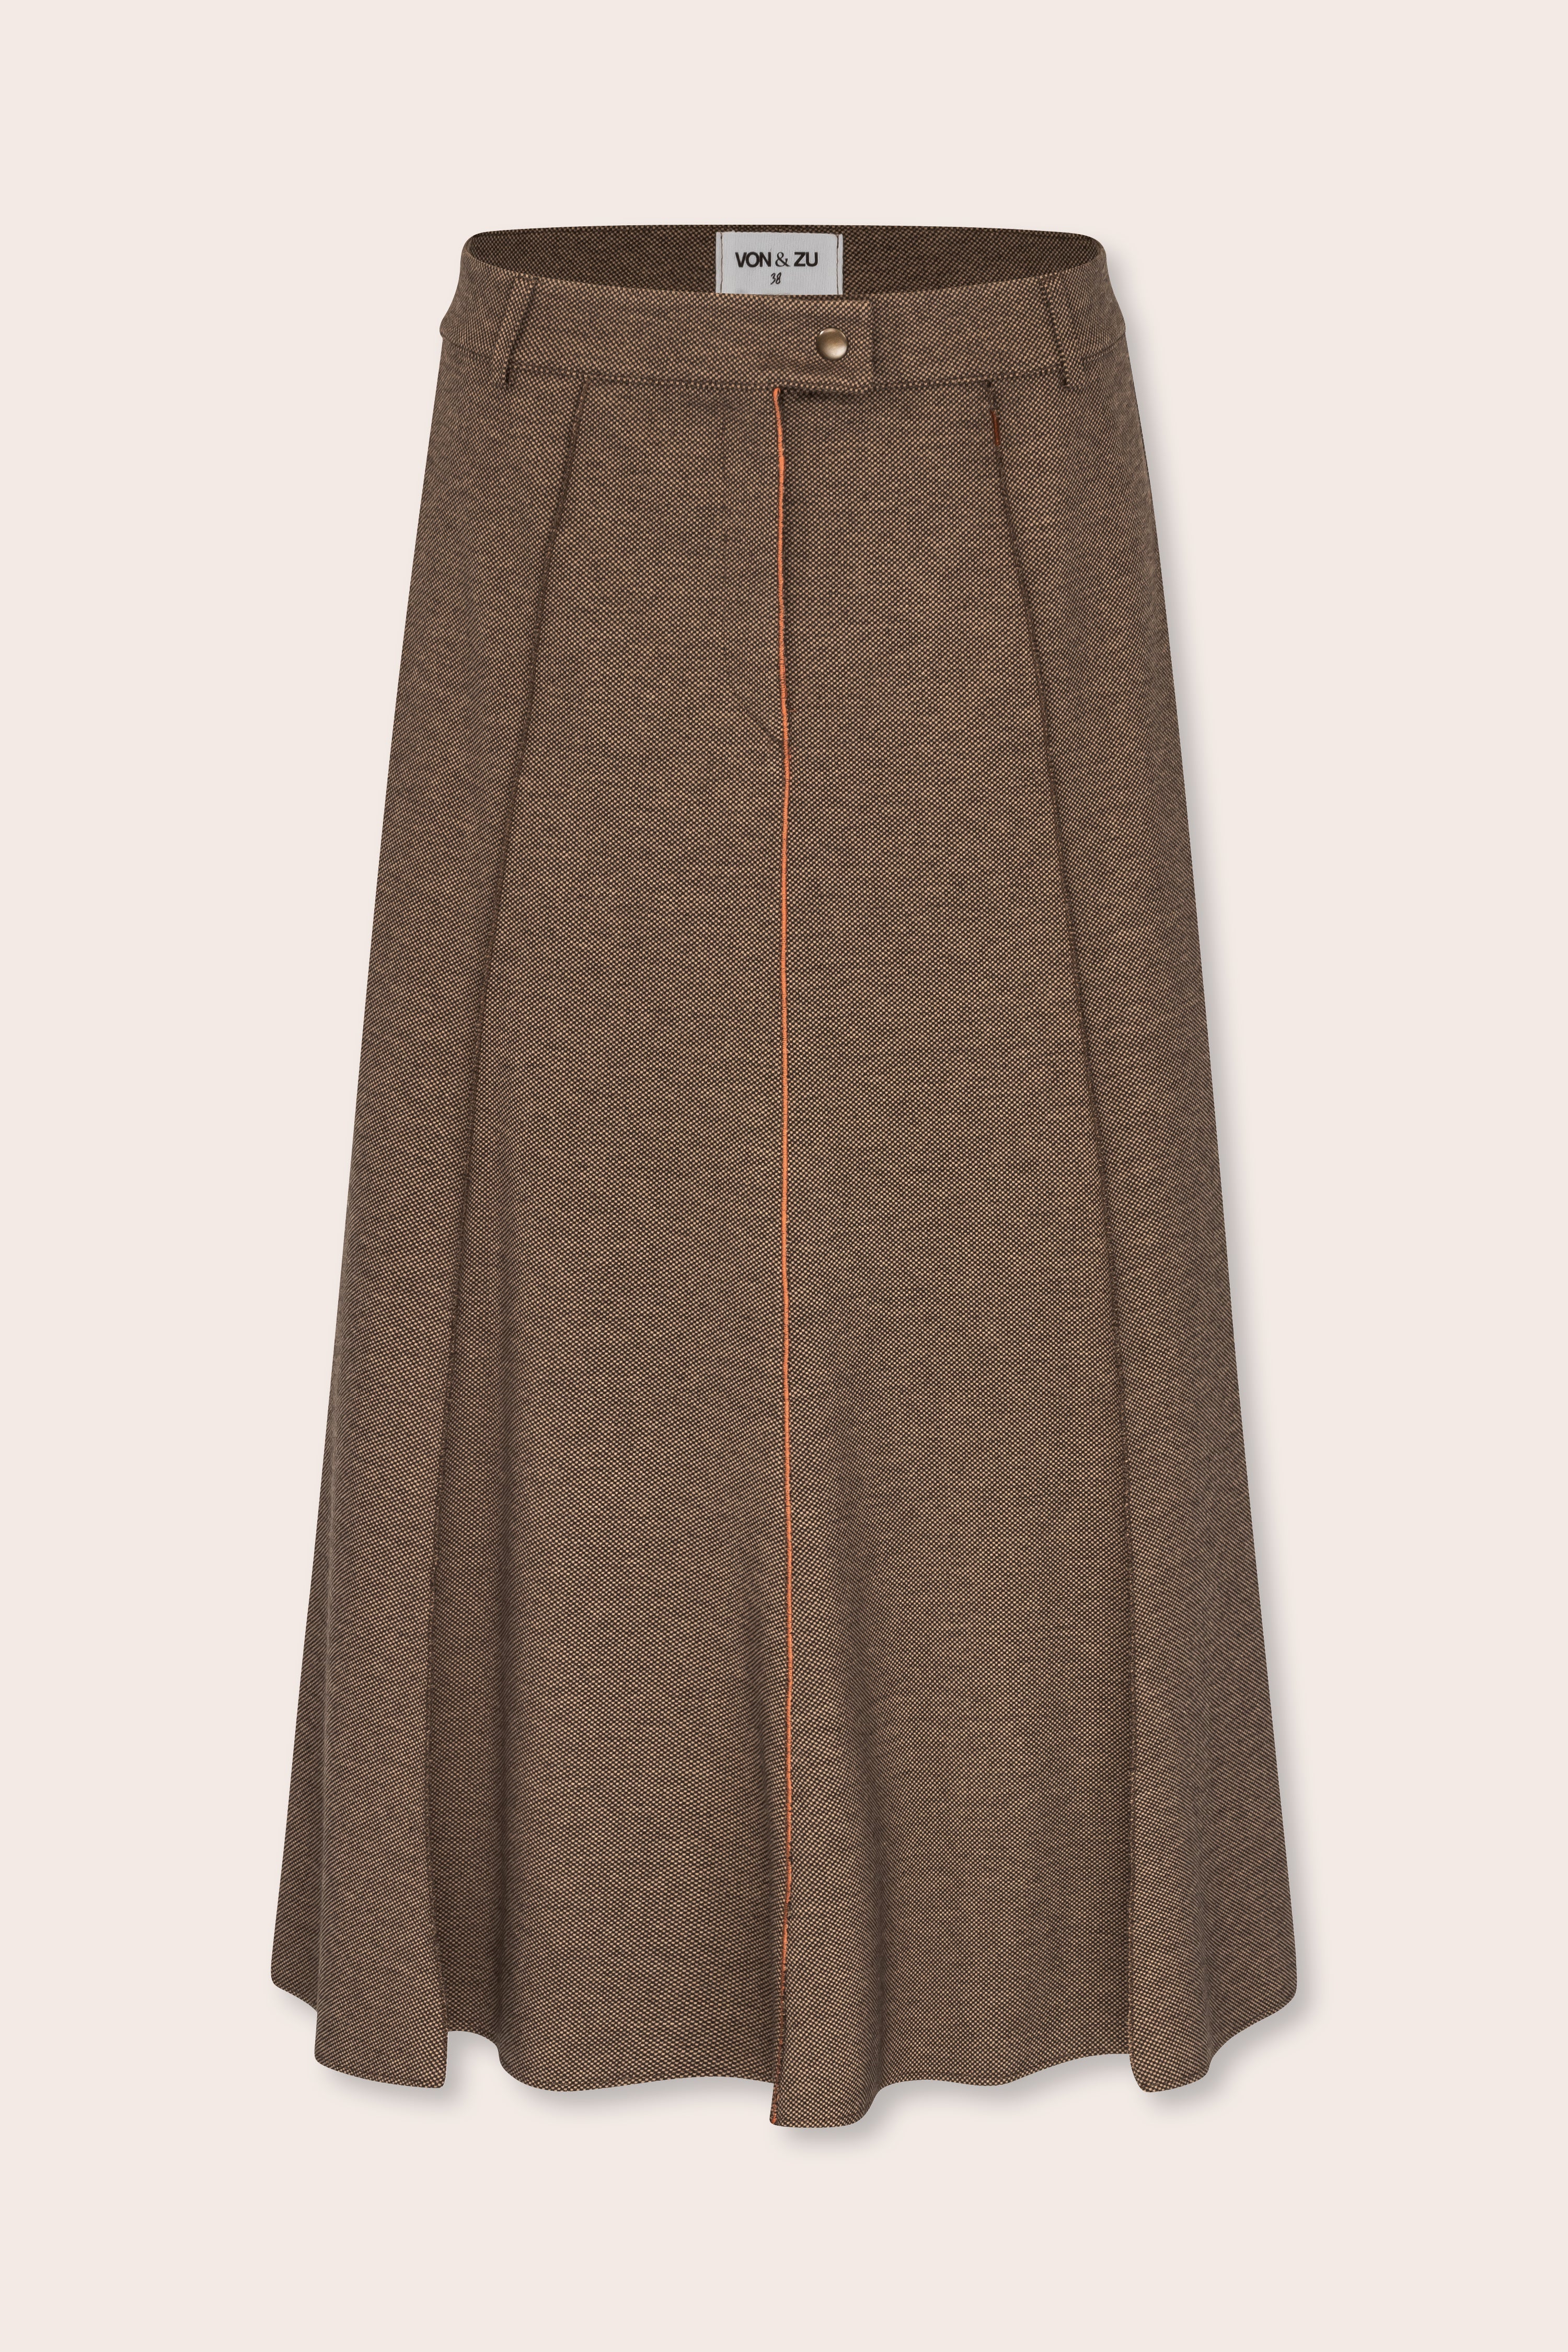 Jersey skirt with godet pleats